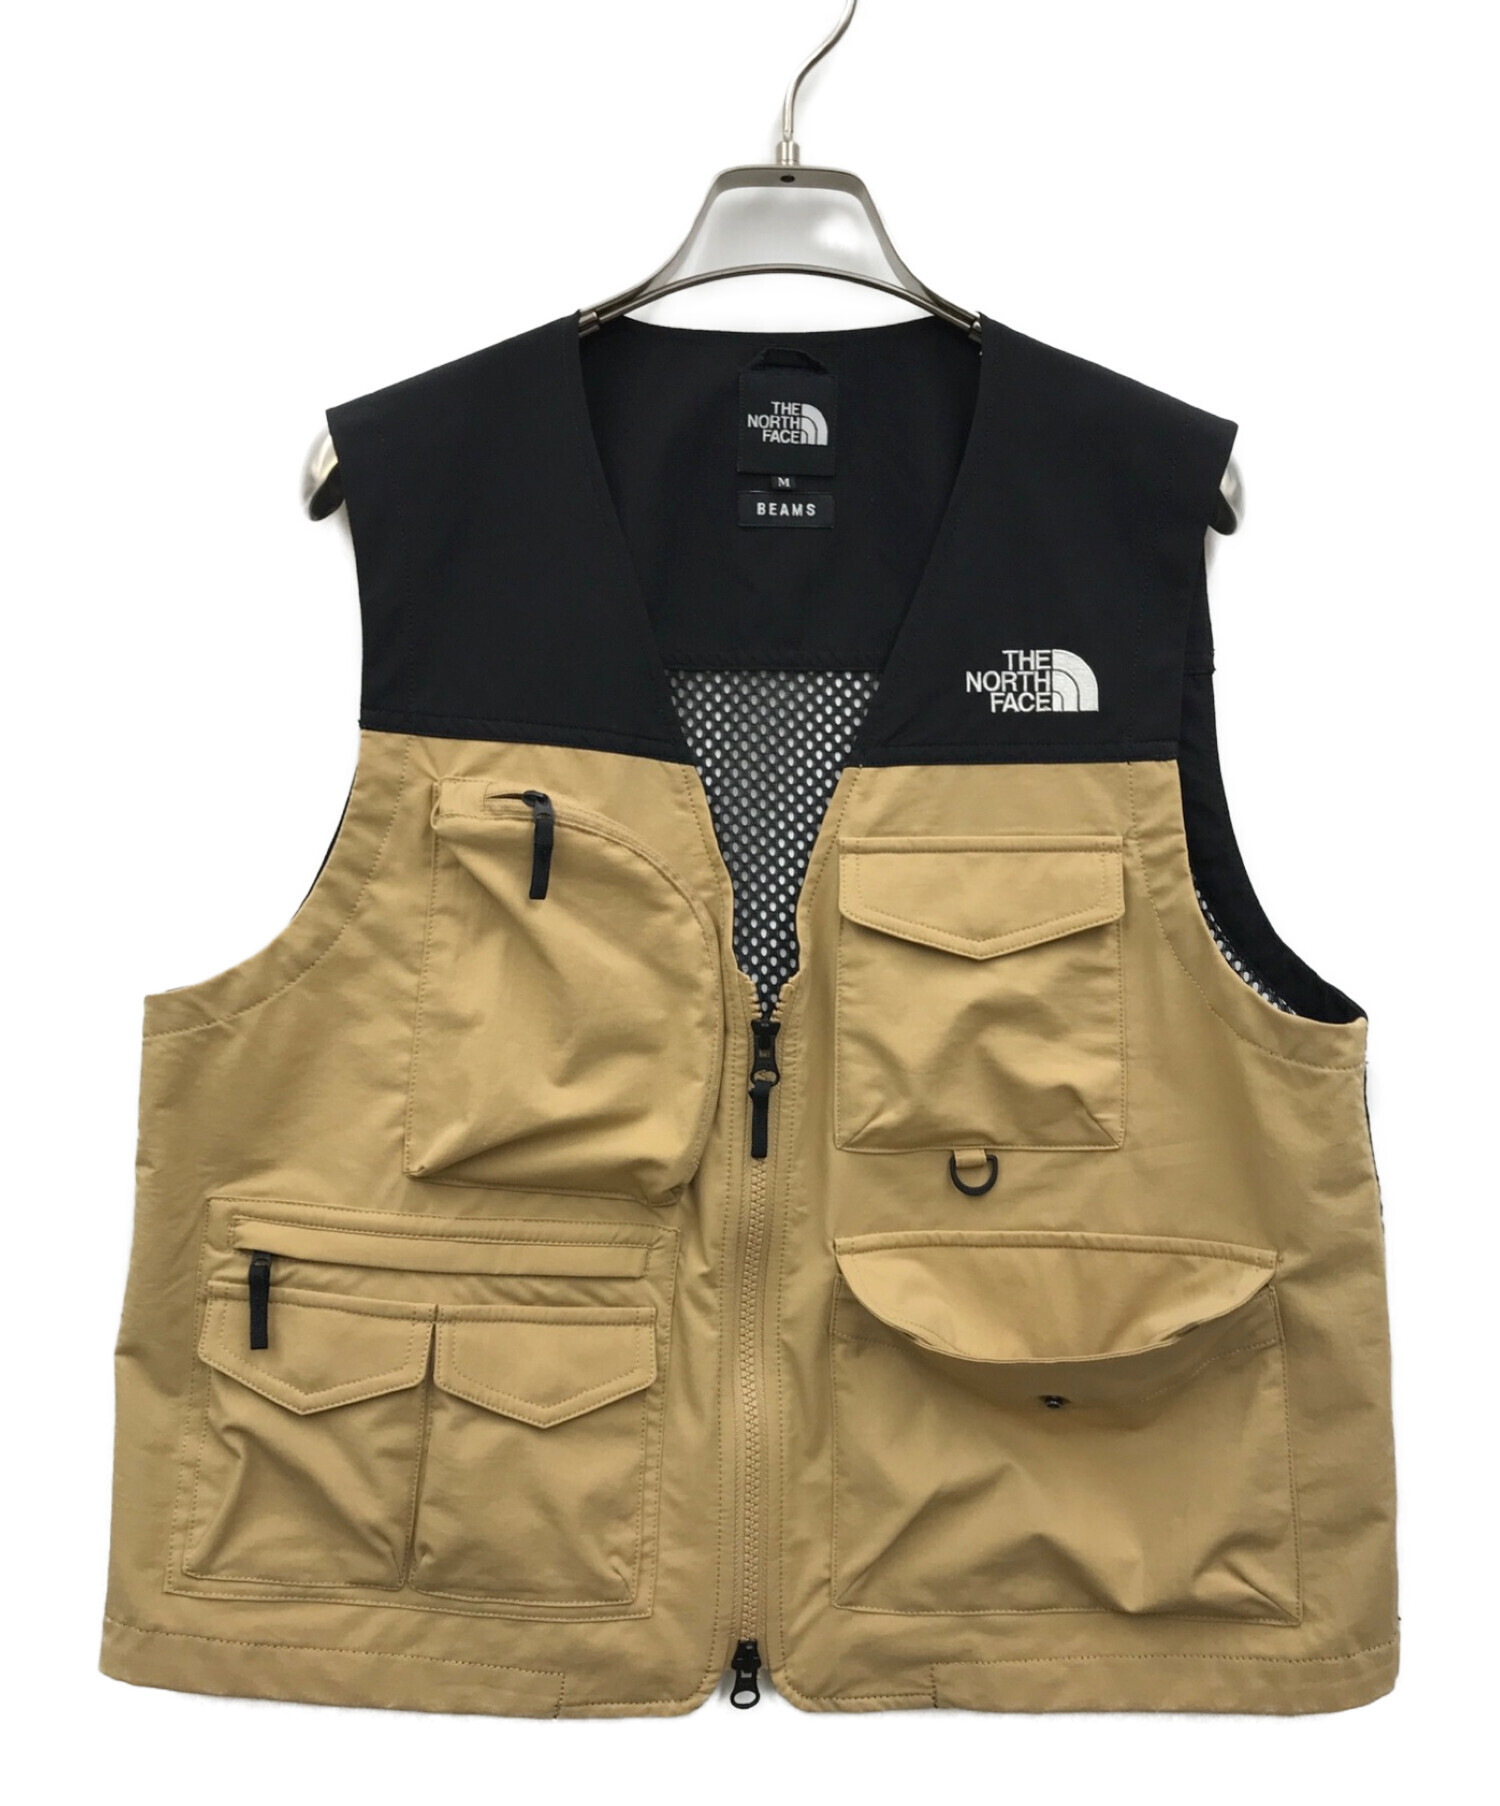 THE NORTH FACE×BEAMS VEST - ベスト